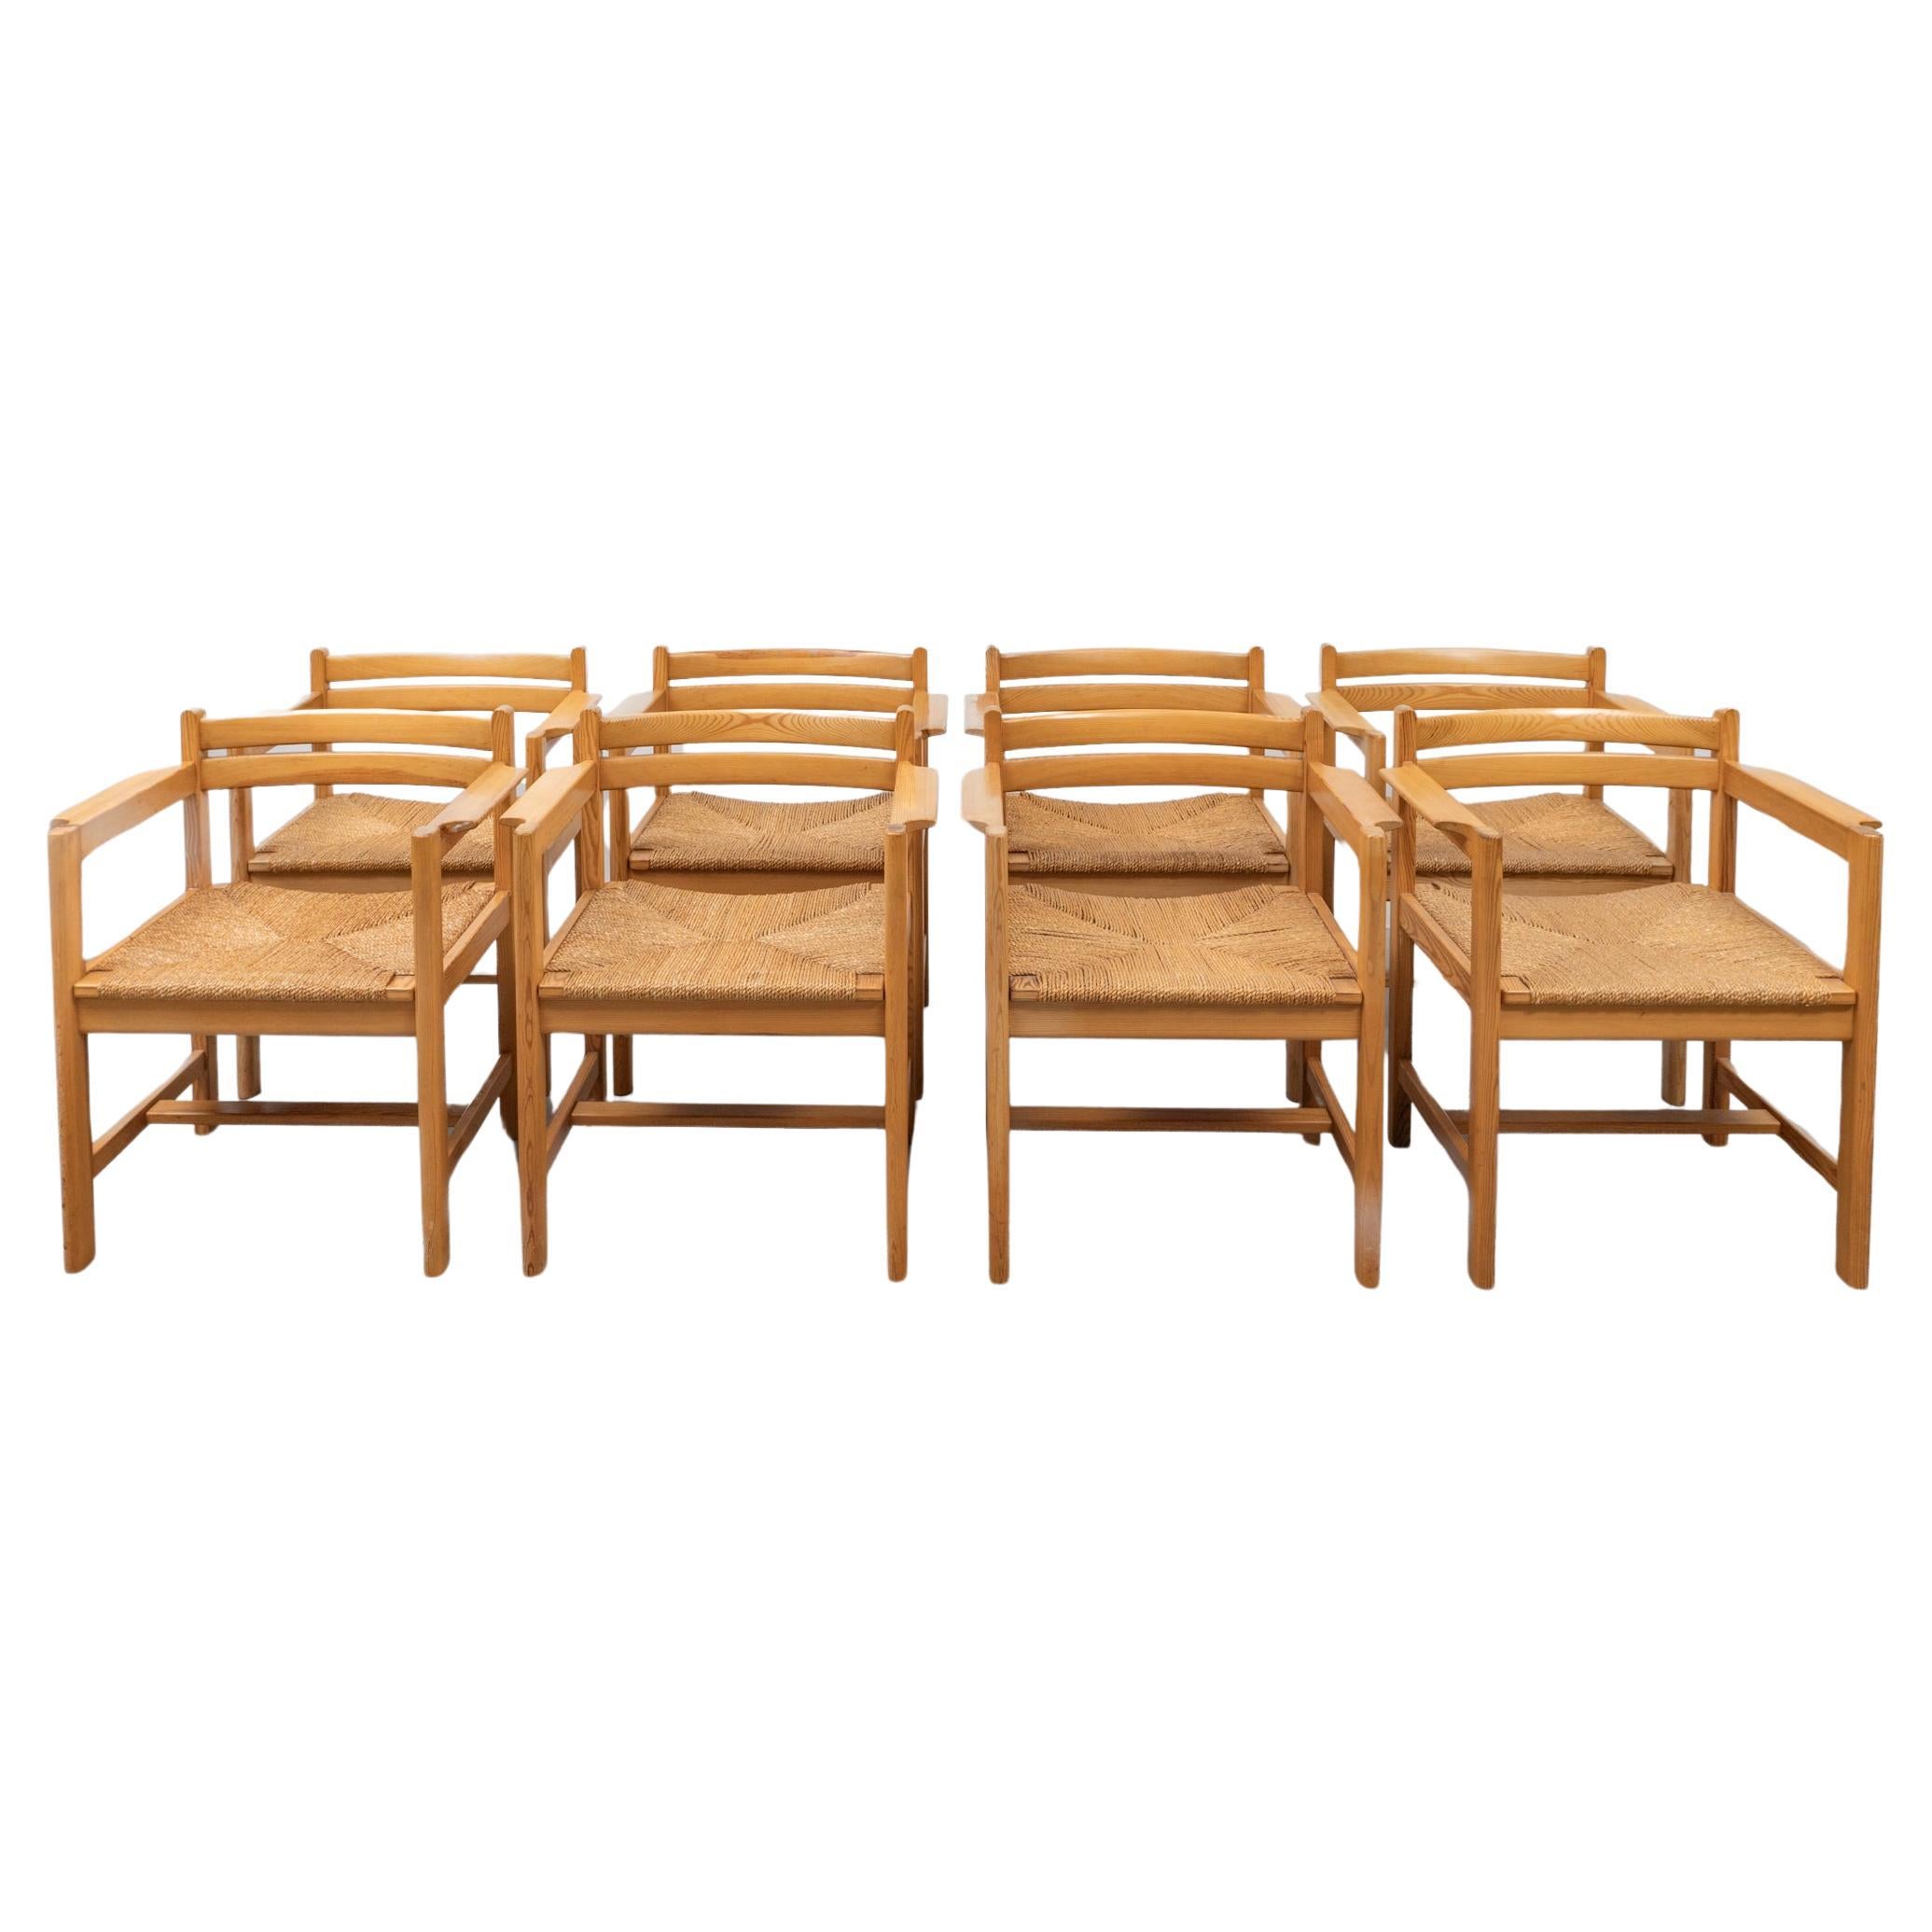 Eight Pine Arm Chairs by Børge Mogensen for AB Karl Andersson & Söner Sweden For Sale